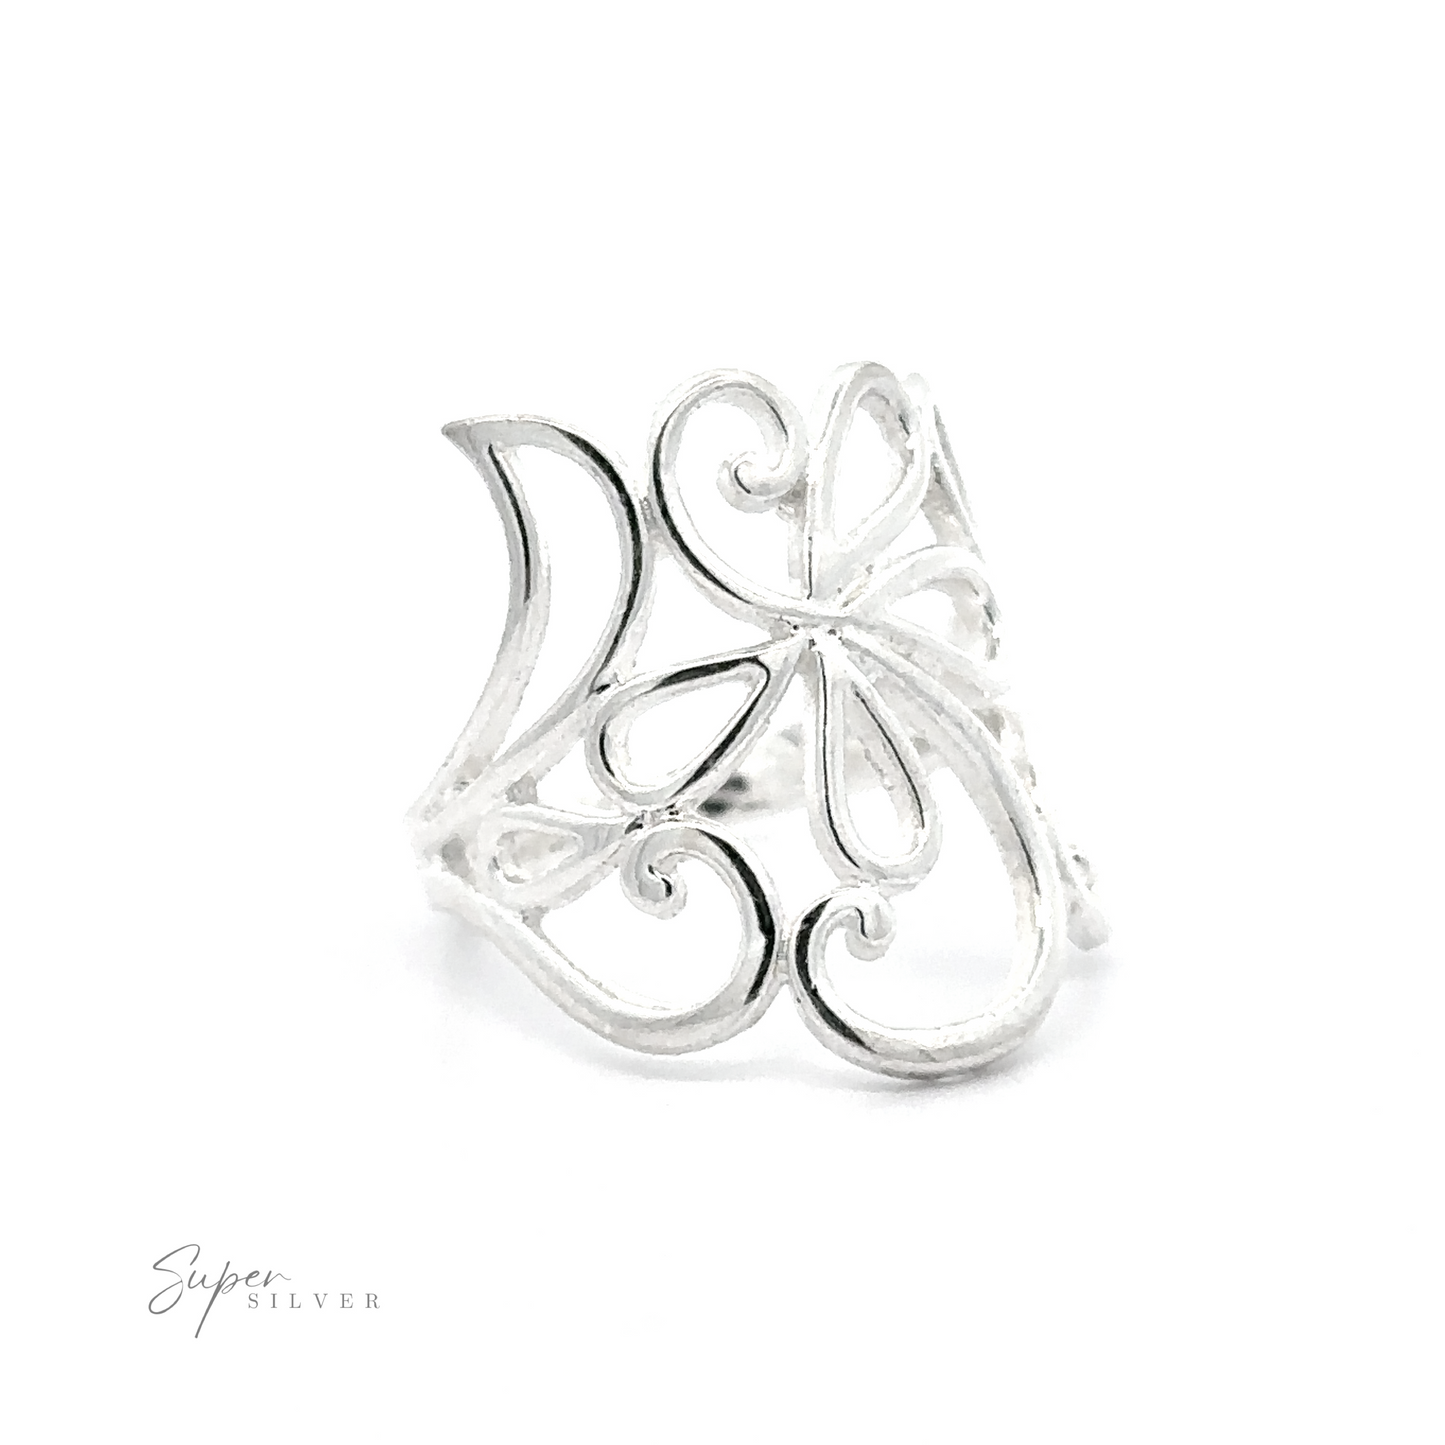 A silver Flower and Vine Ring, perfect for an everyday look.